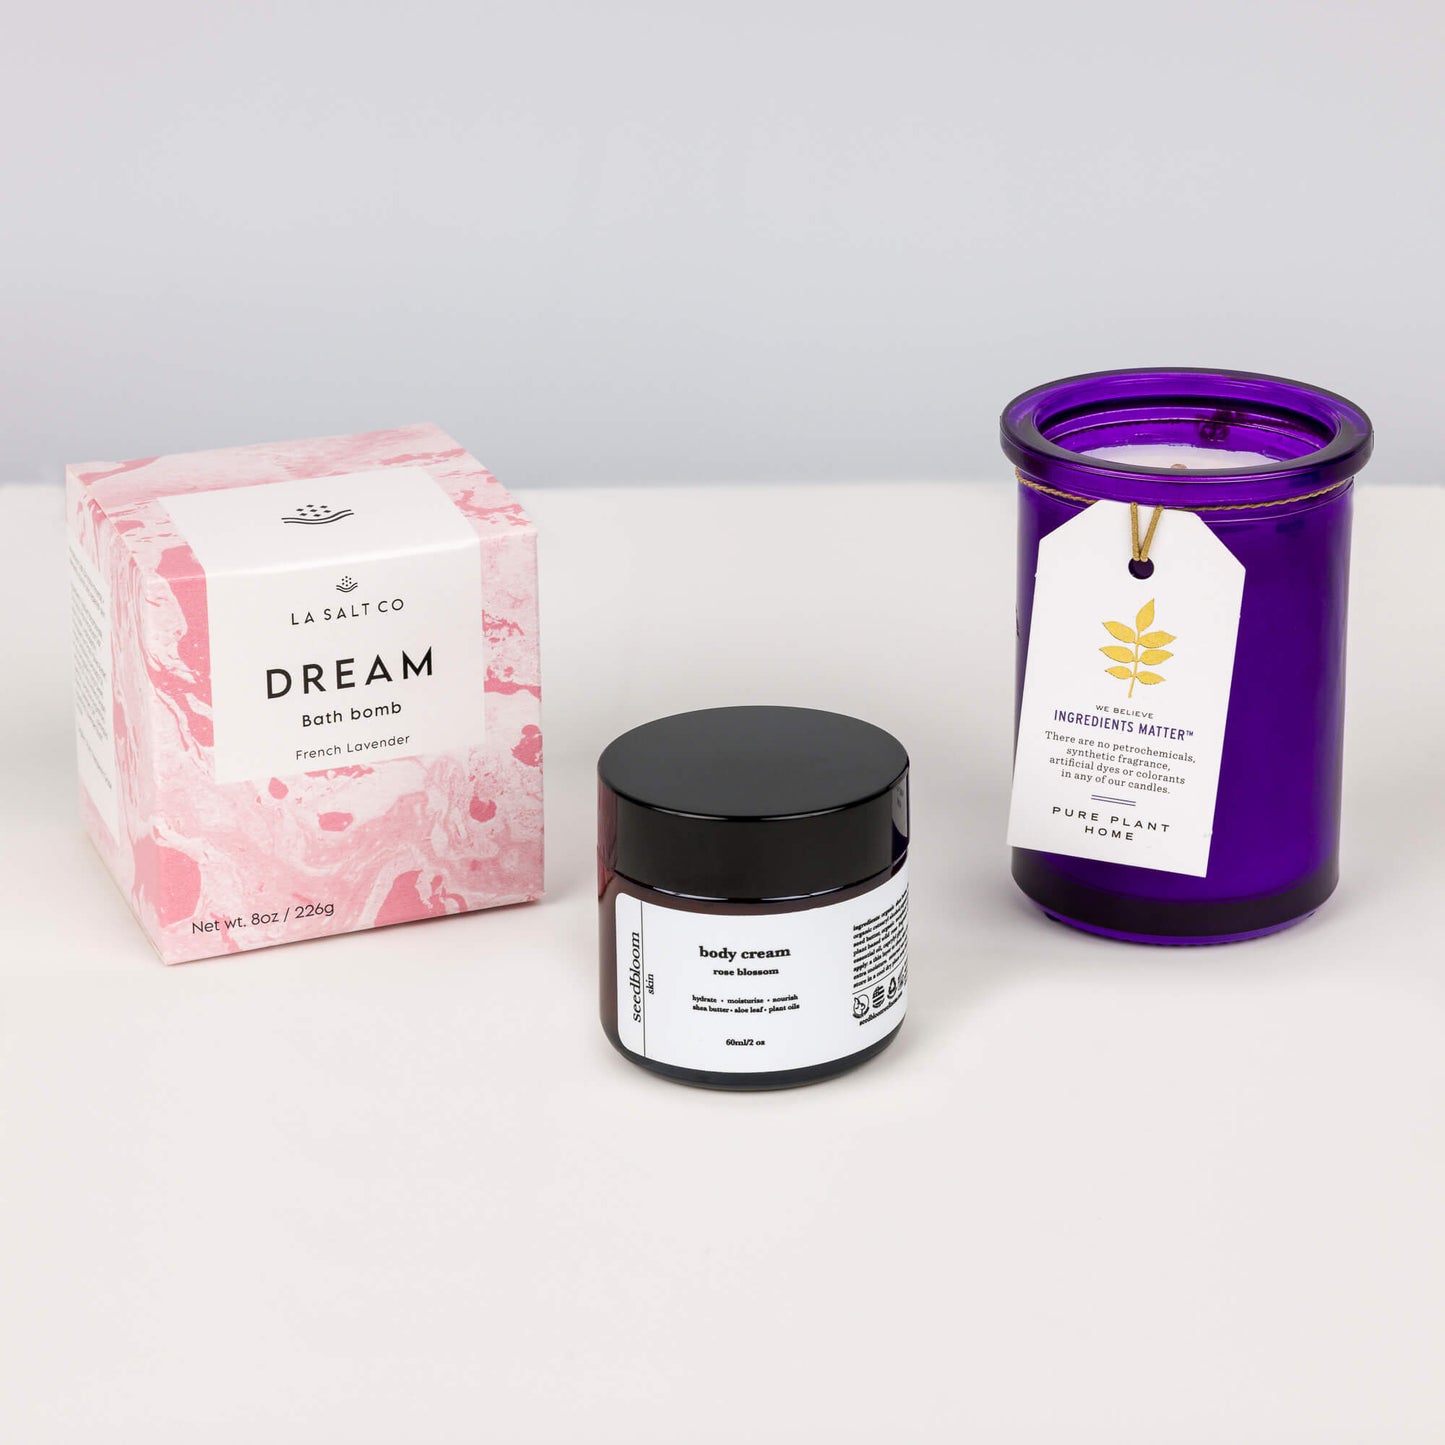 Pastel Dreams Bath Box, a curated collection of a bath bomb, aromatherapy candle, and rosehip moisturizer